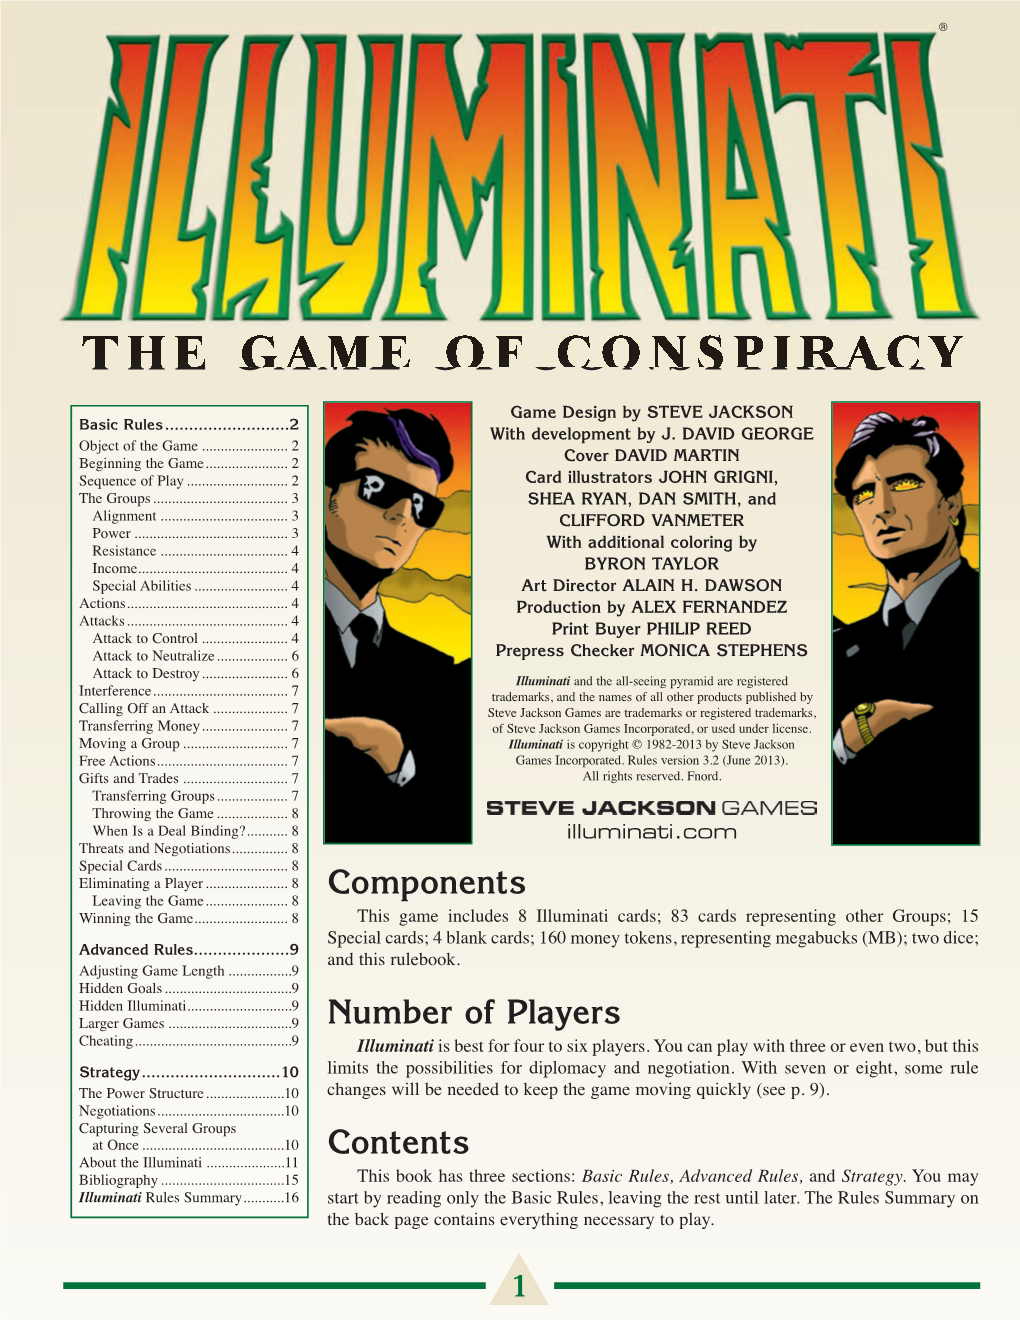 The Game of Conspiracy